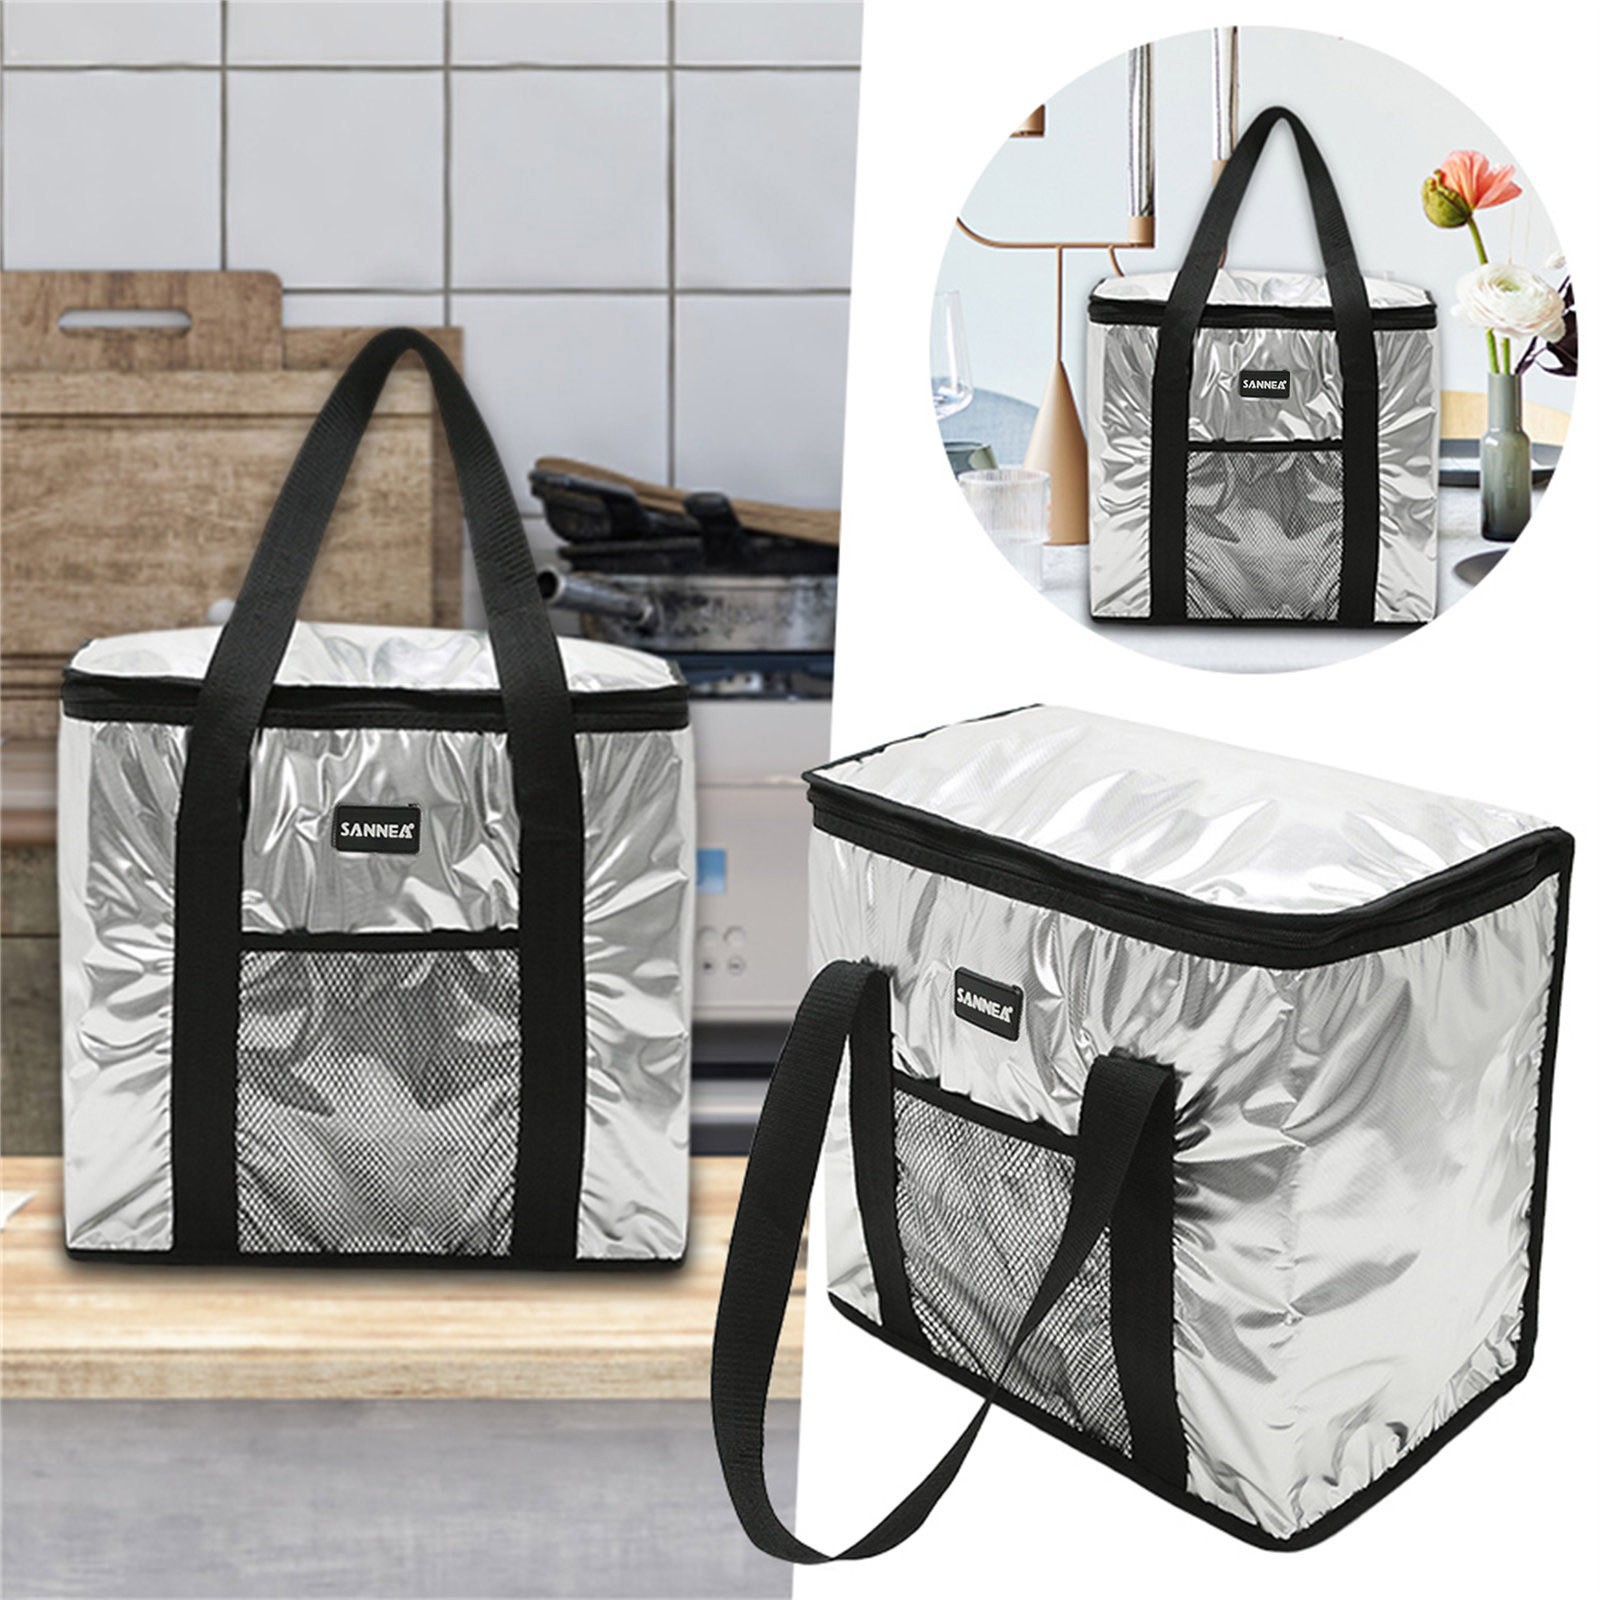 myvepuop Lunch Bag Aluminum Film Insulation Bags For Outdoor Picnics ...